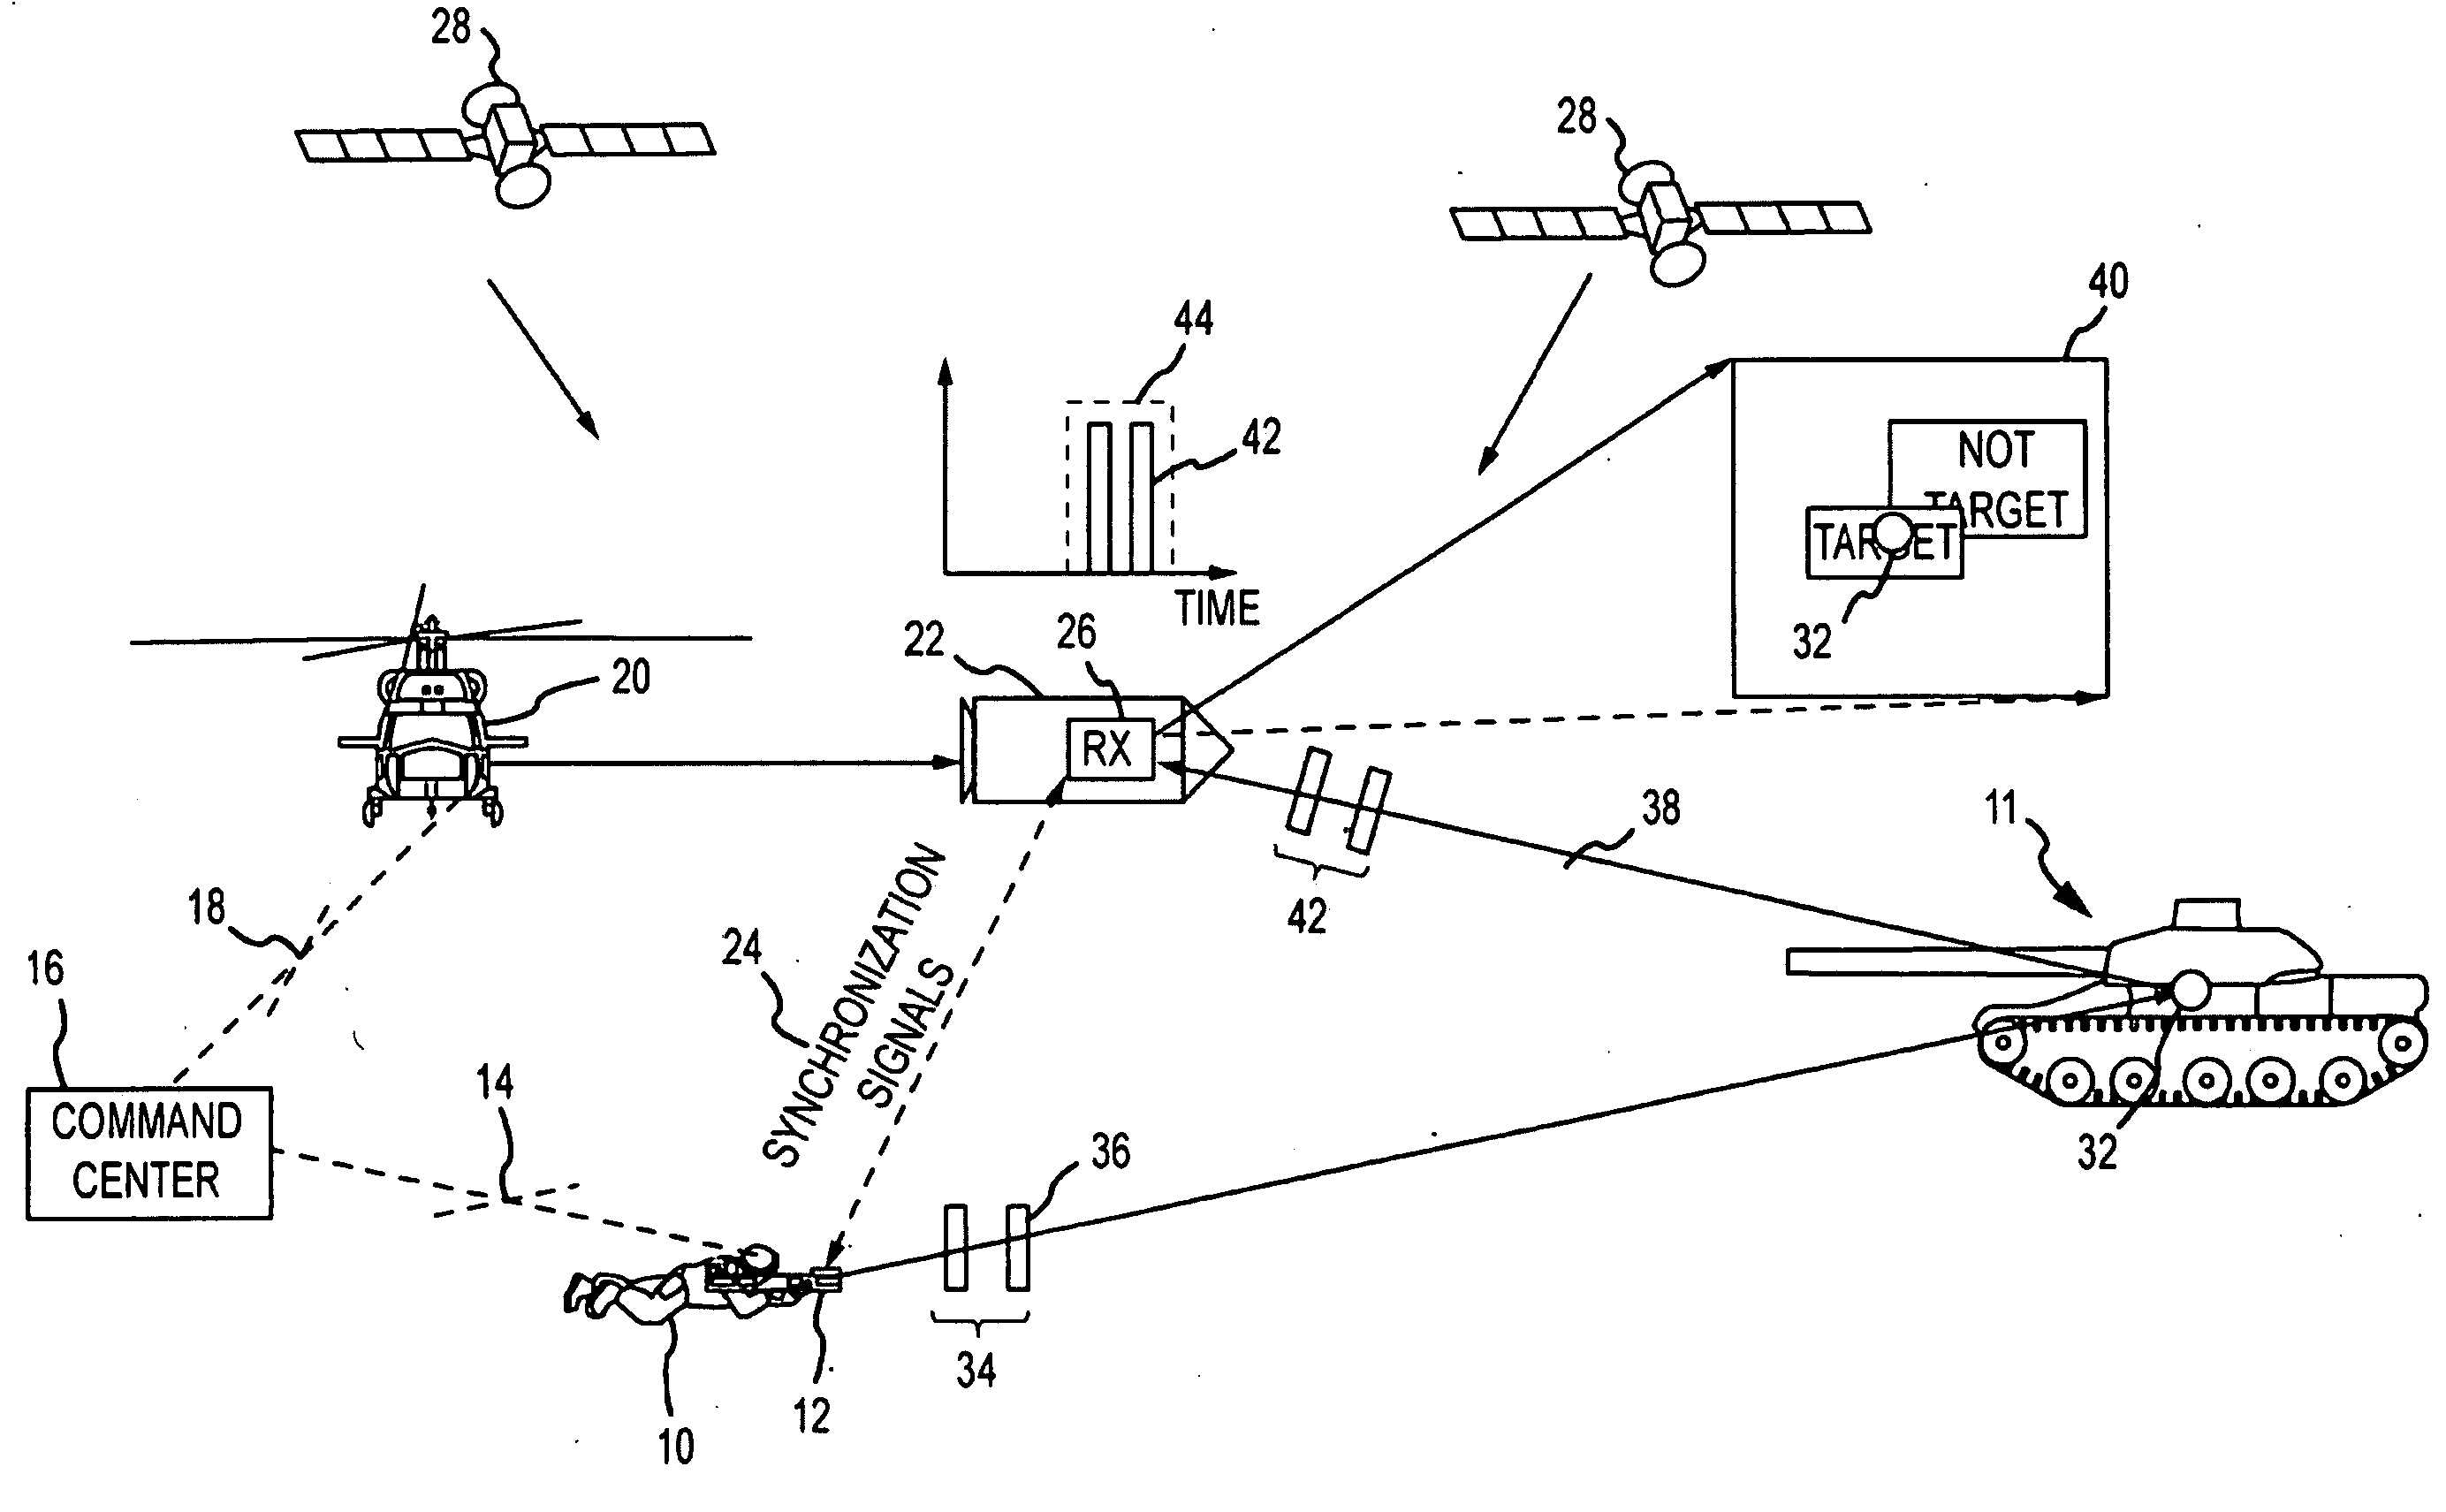 Absolute time encoded semi-active laser designation